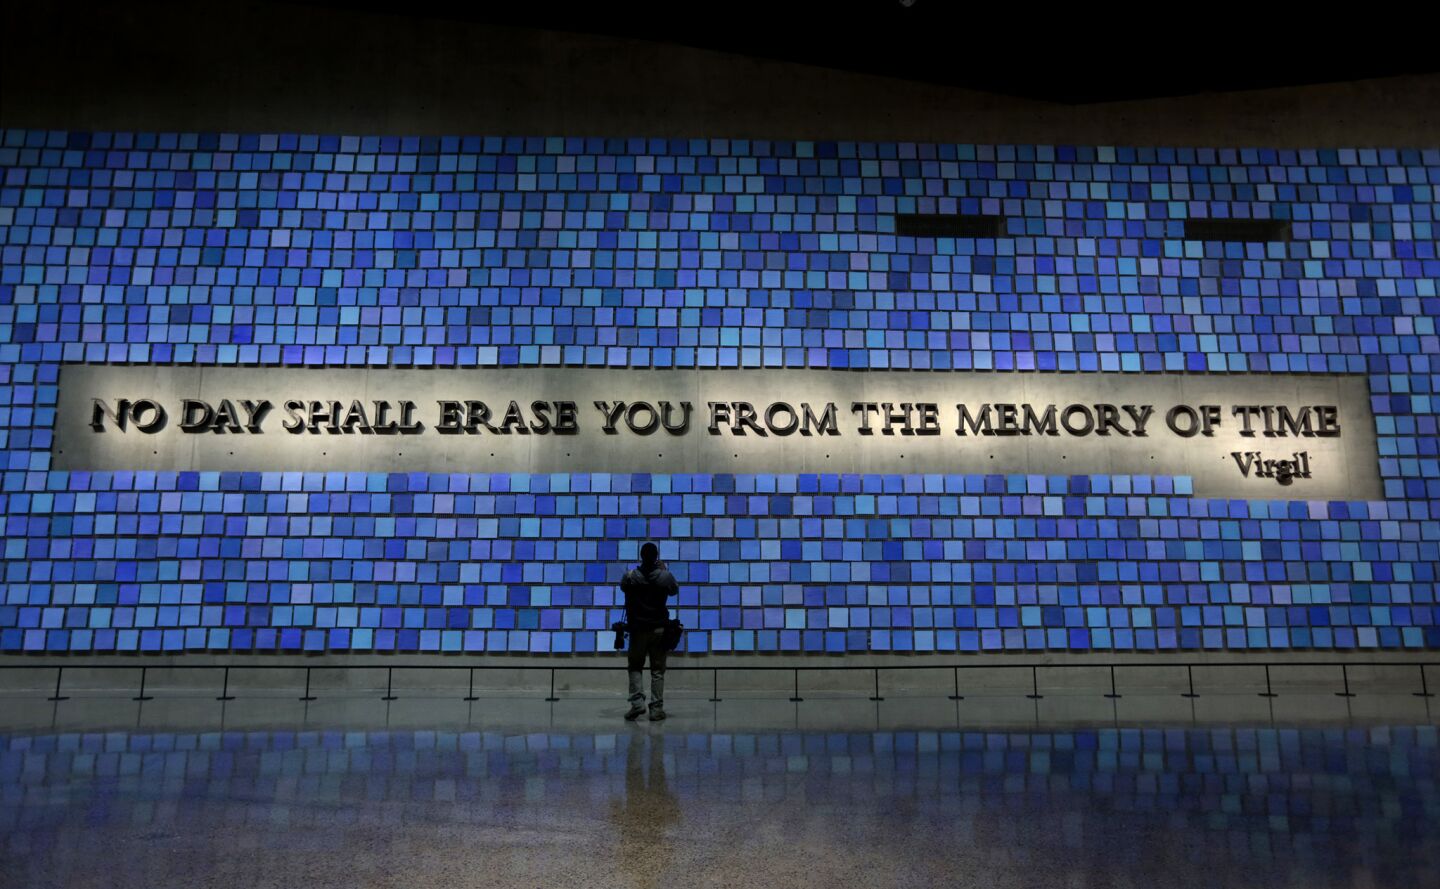 Arts and culture in pictures by The Times | 9/11 Memorial Museum